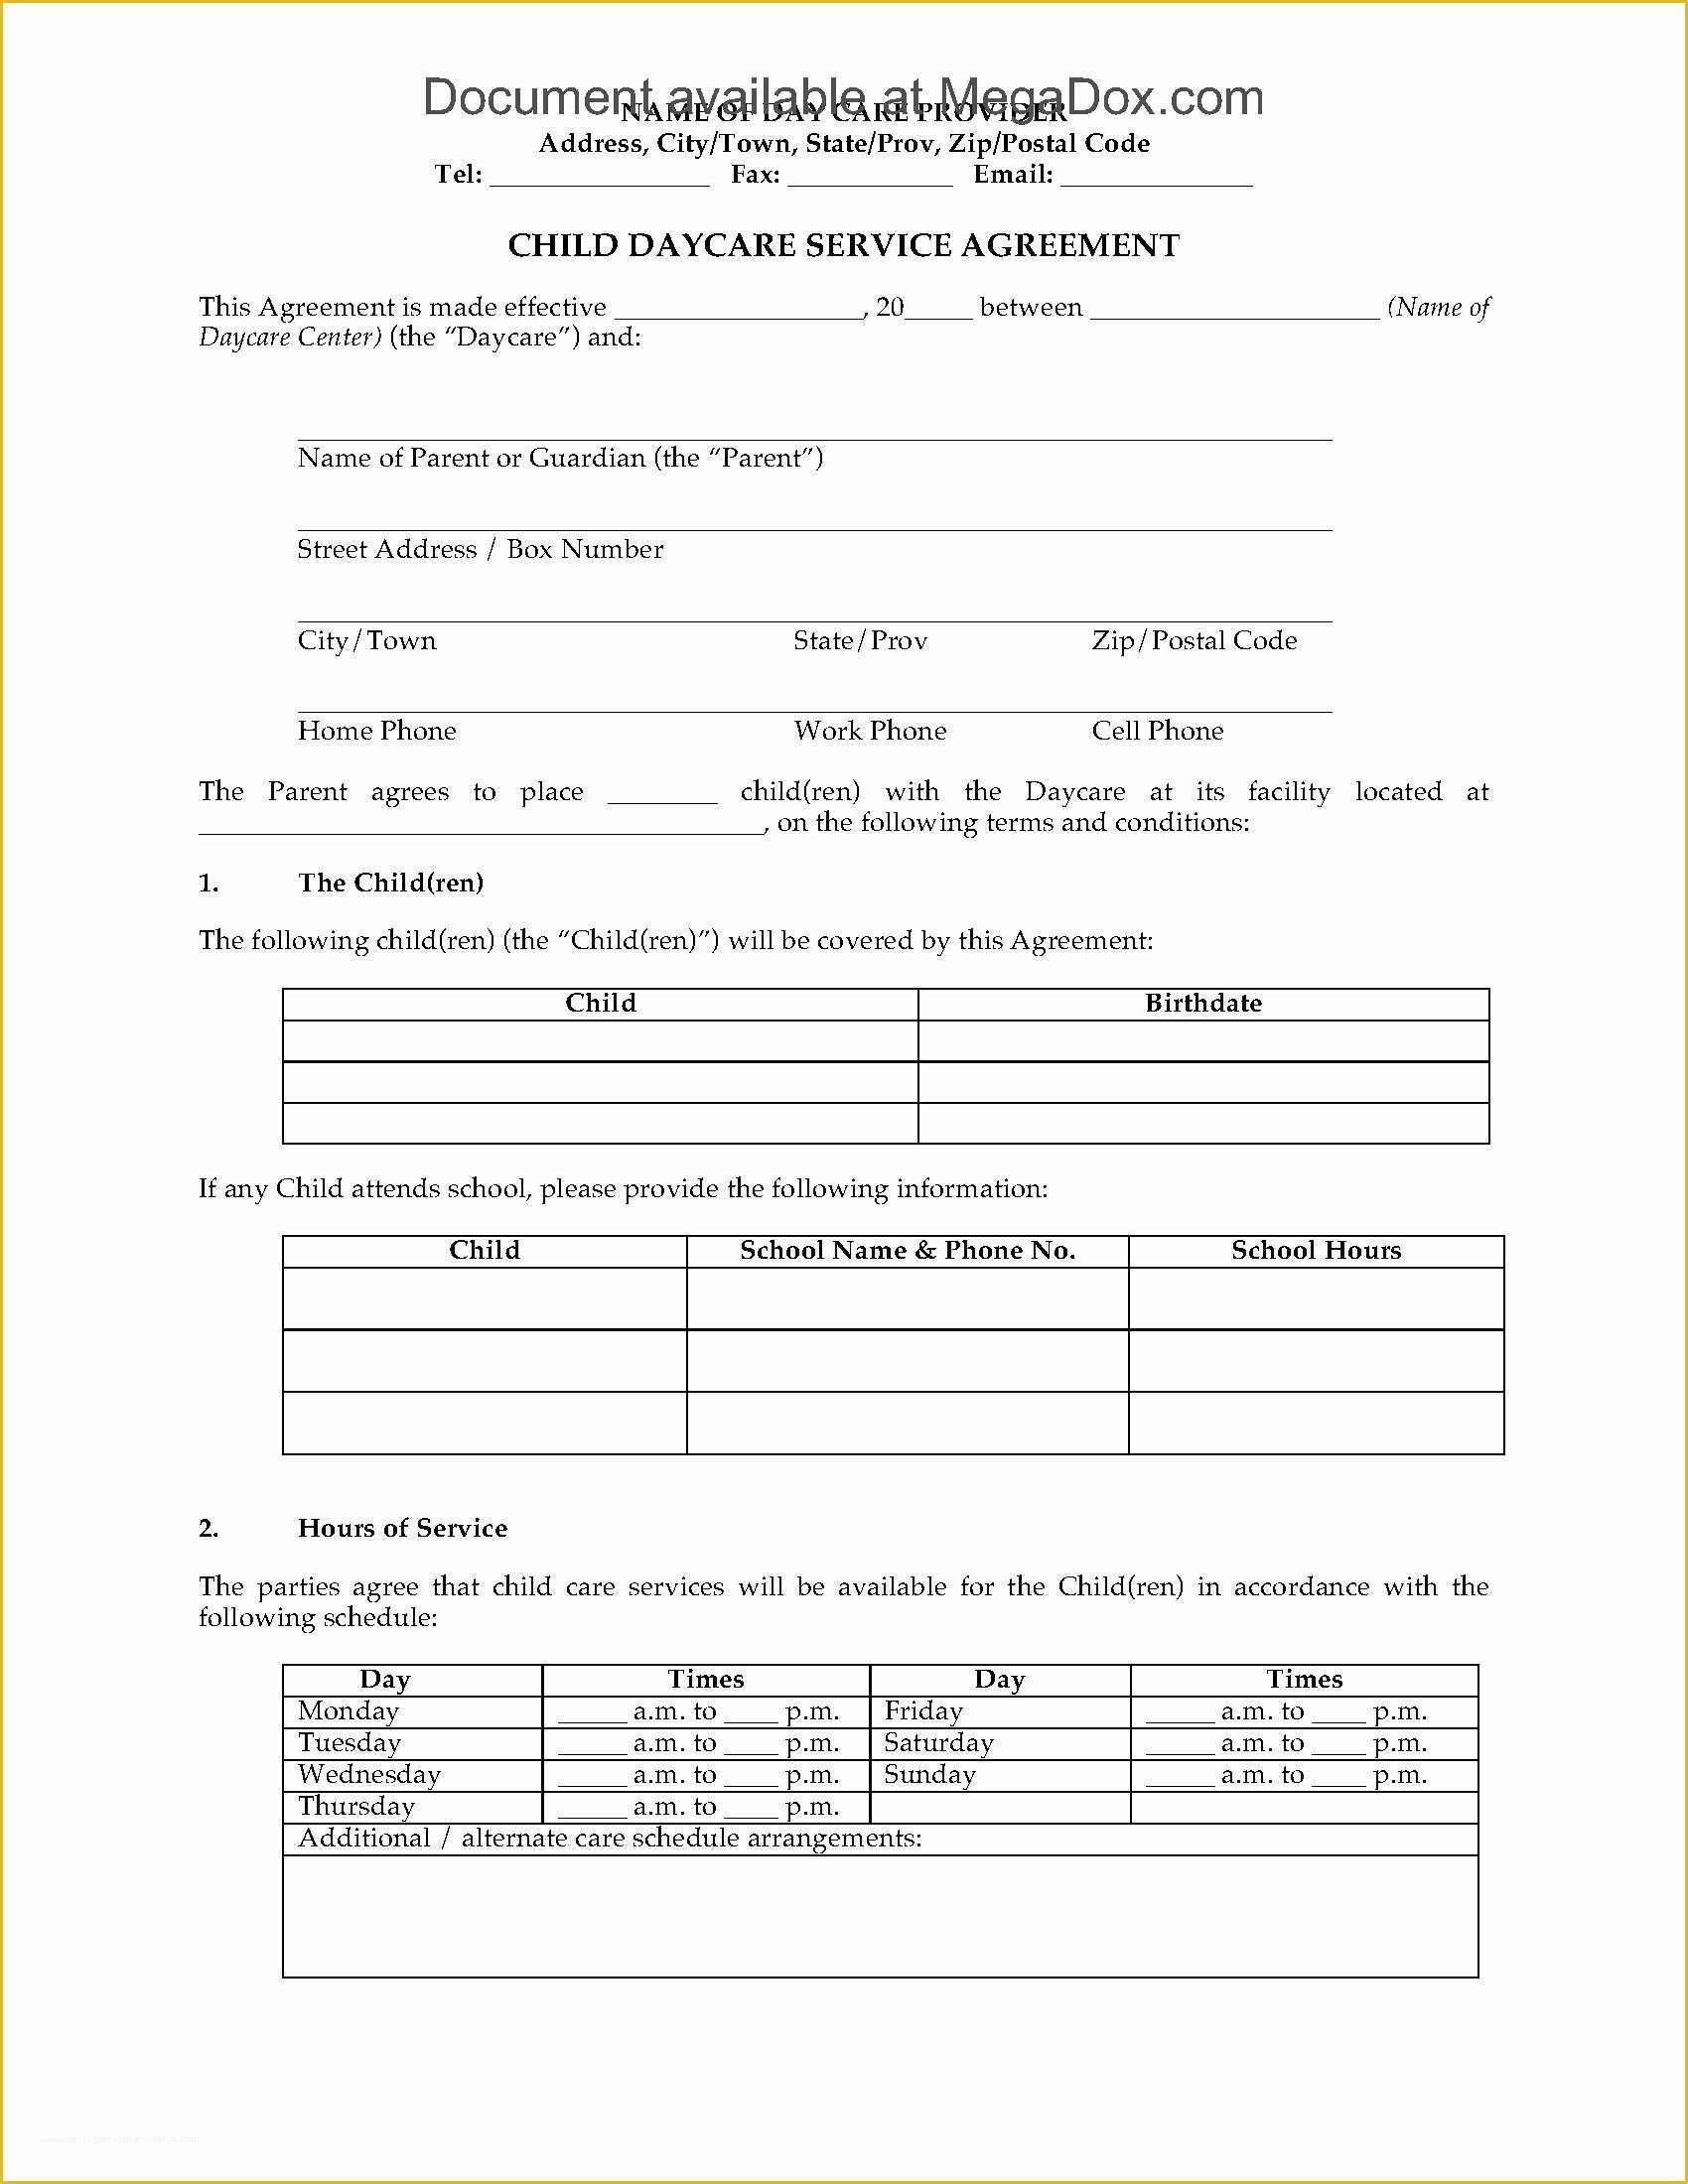 Daycare Contract Templates Free Of Child Daycare Service Agreement